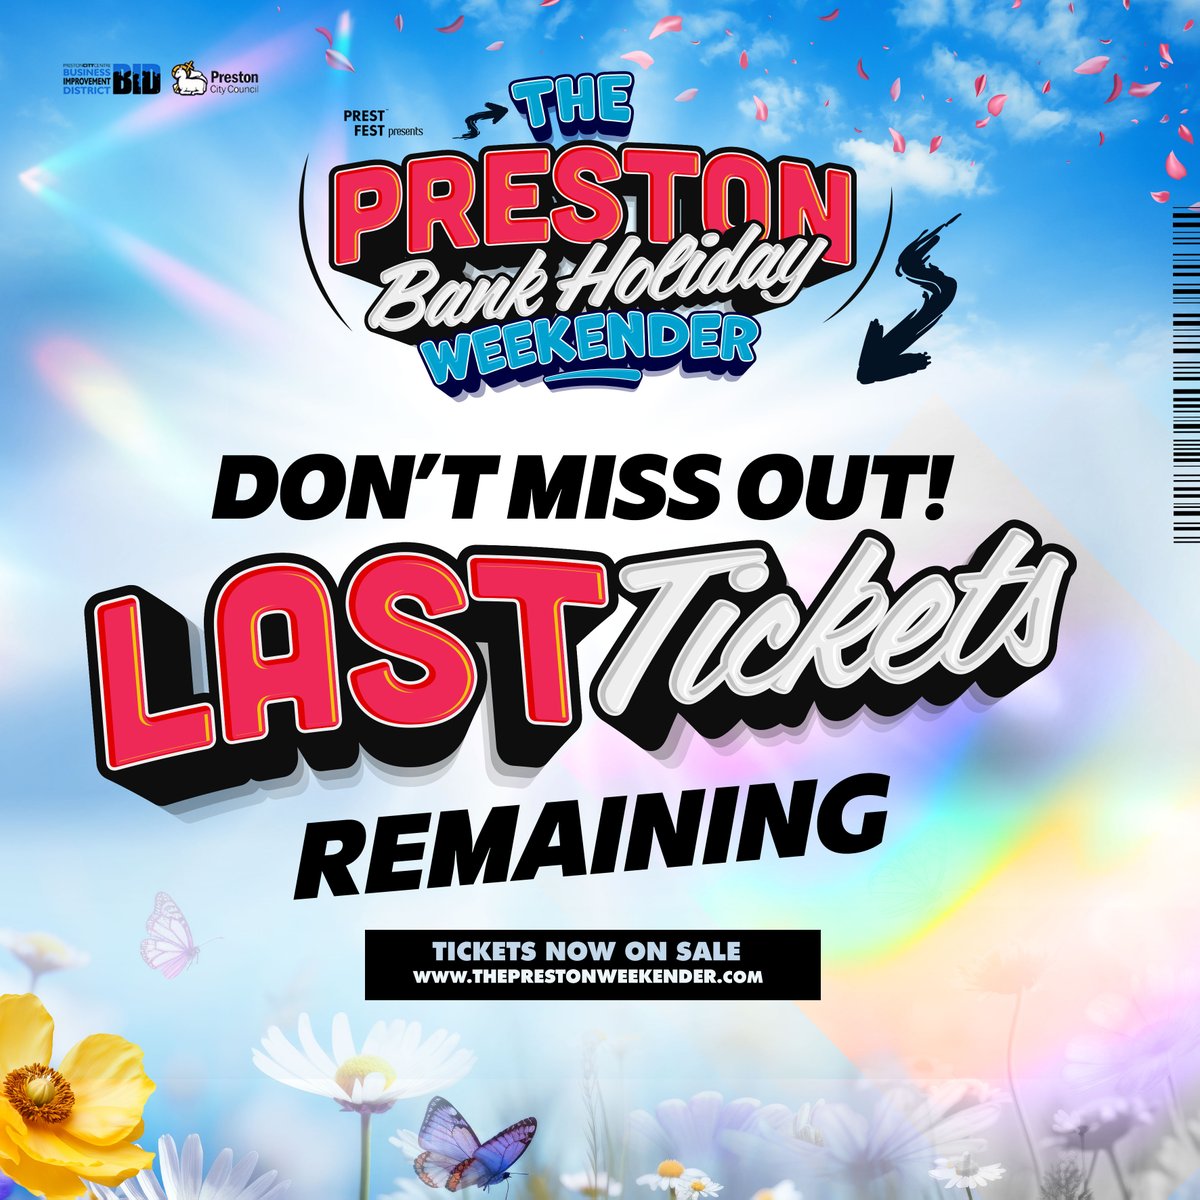 Ooooh heck, we're running low... 👀 LAST release tickets are now on sale for the #Preston Bank Holiday Weekender! Get yours now, and join us for an unmissable weekend of music, right in the heart of the city centre. Don't delay, get yourself in: ThePrestonWeekender.com